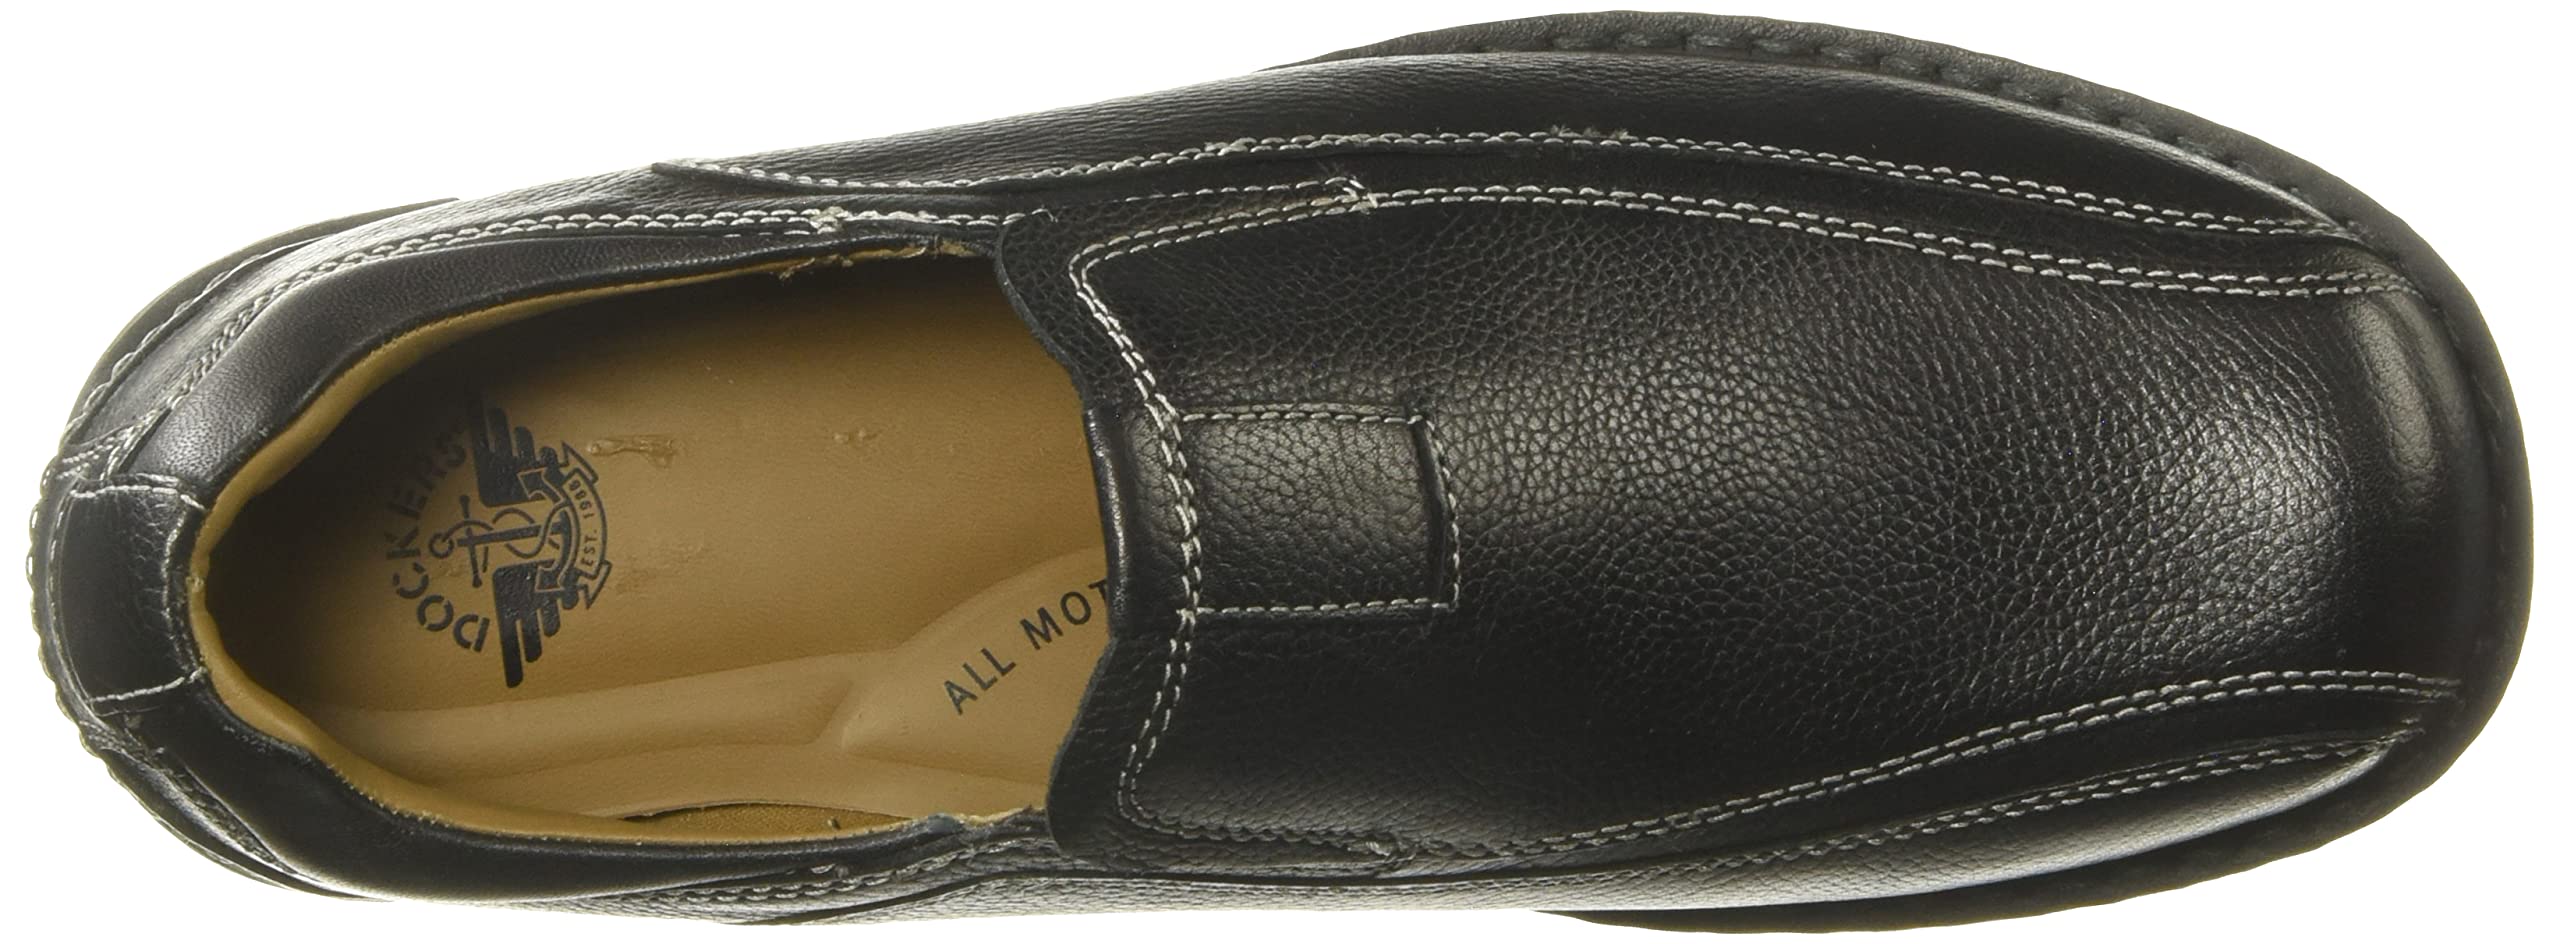 Dockers Men's Agent Leather Dress Casual Loafer Shoe